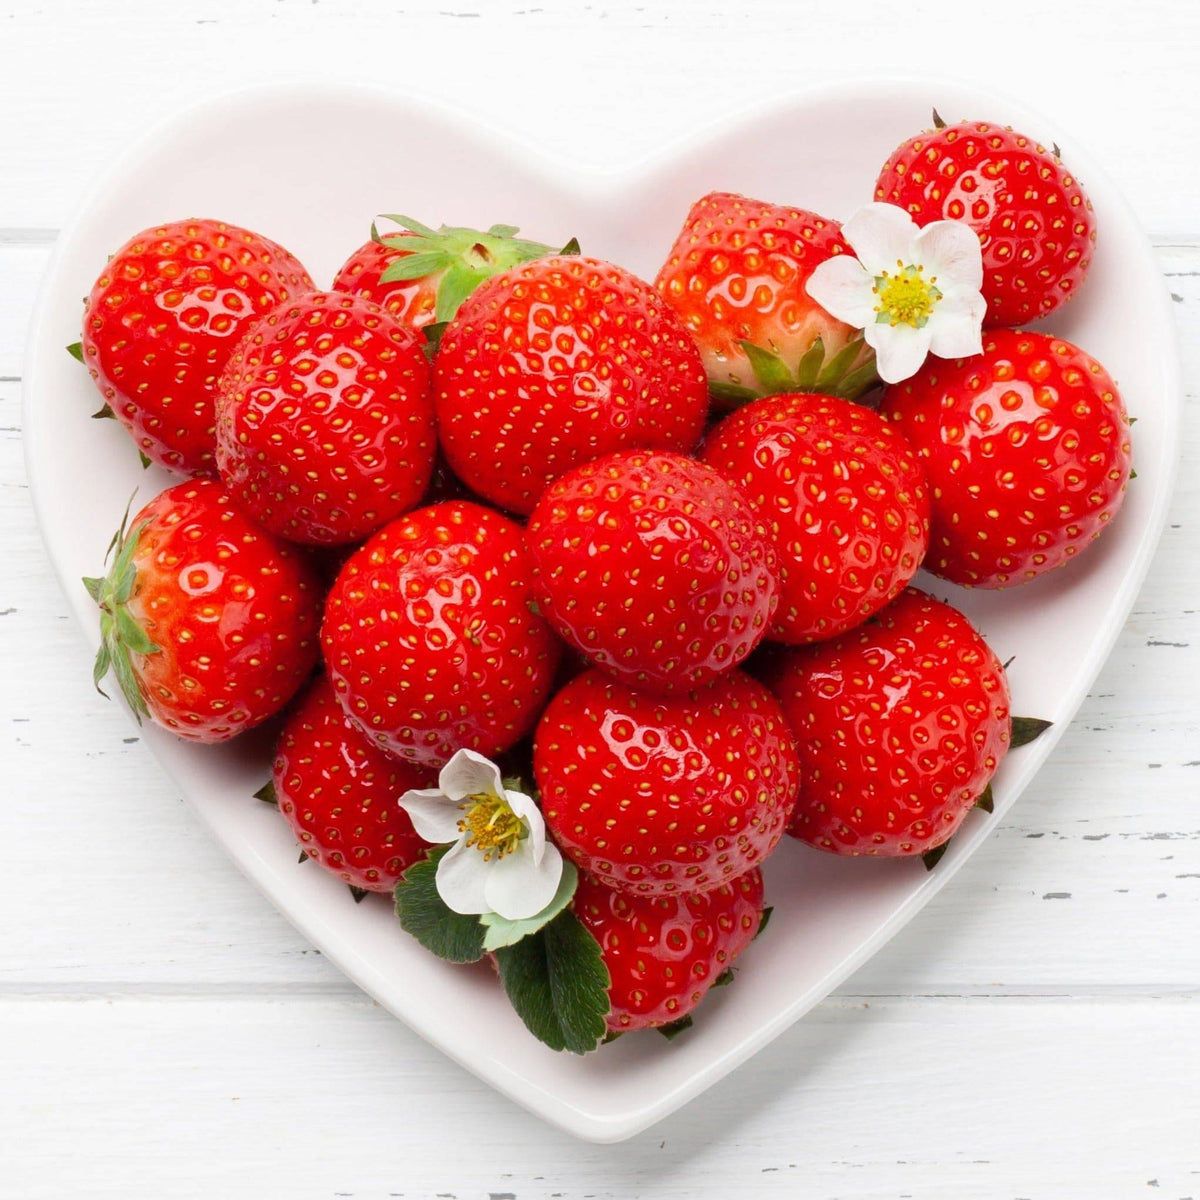 Strawberry & Lily Fragrance Oil - Craftiful Fragrance Oils - Supplies for Wax Melts, Candles, Room Sprays, Reed Diffusers, Bath Bombs, Soaps, Perfumes, Bath Salts and Body Sprays